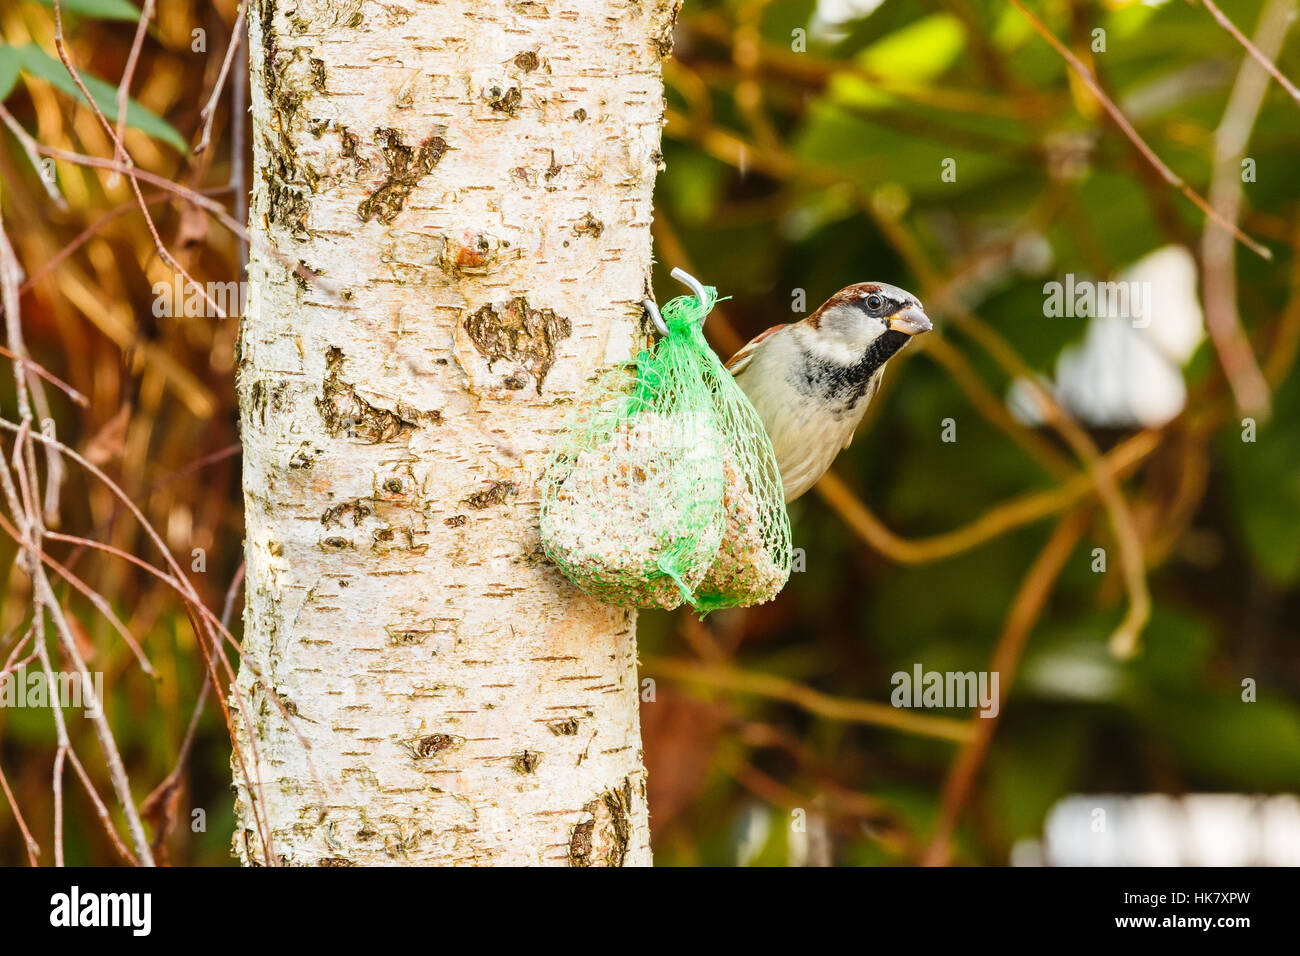 Common house sparrow feeding on fat ball with seeds in green net on birch tree in garden Stock Photo